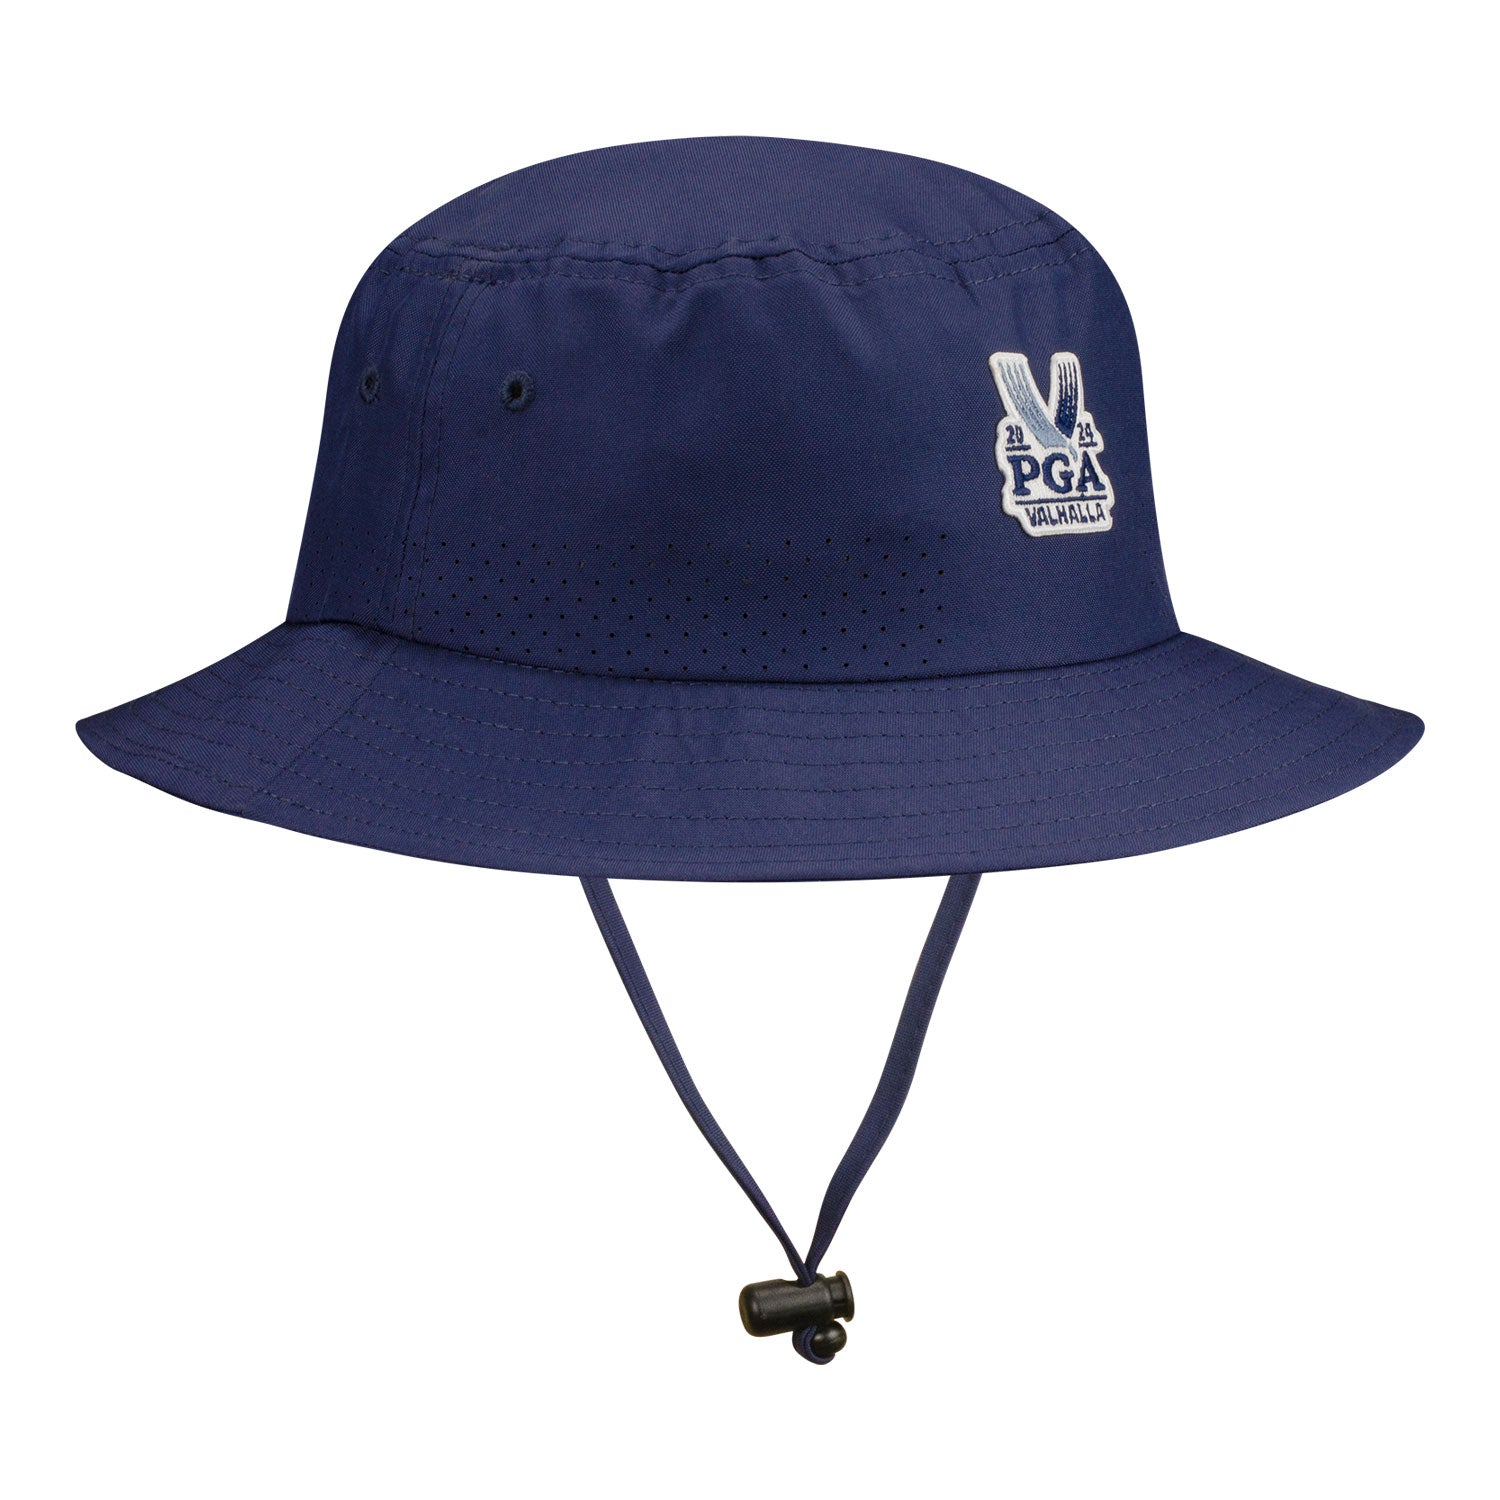 Imperial CC051 - The Geysir Cooling Sun - Protection Bucket in Navy - Front Left View